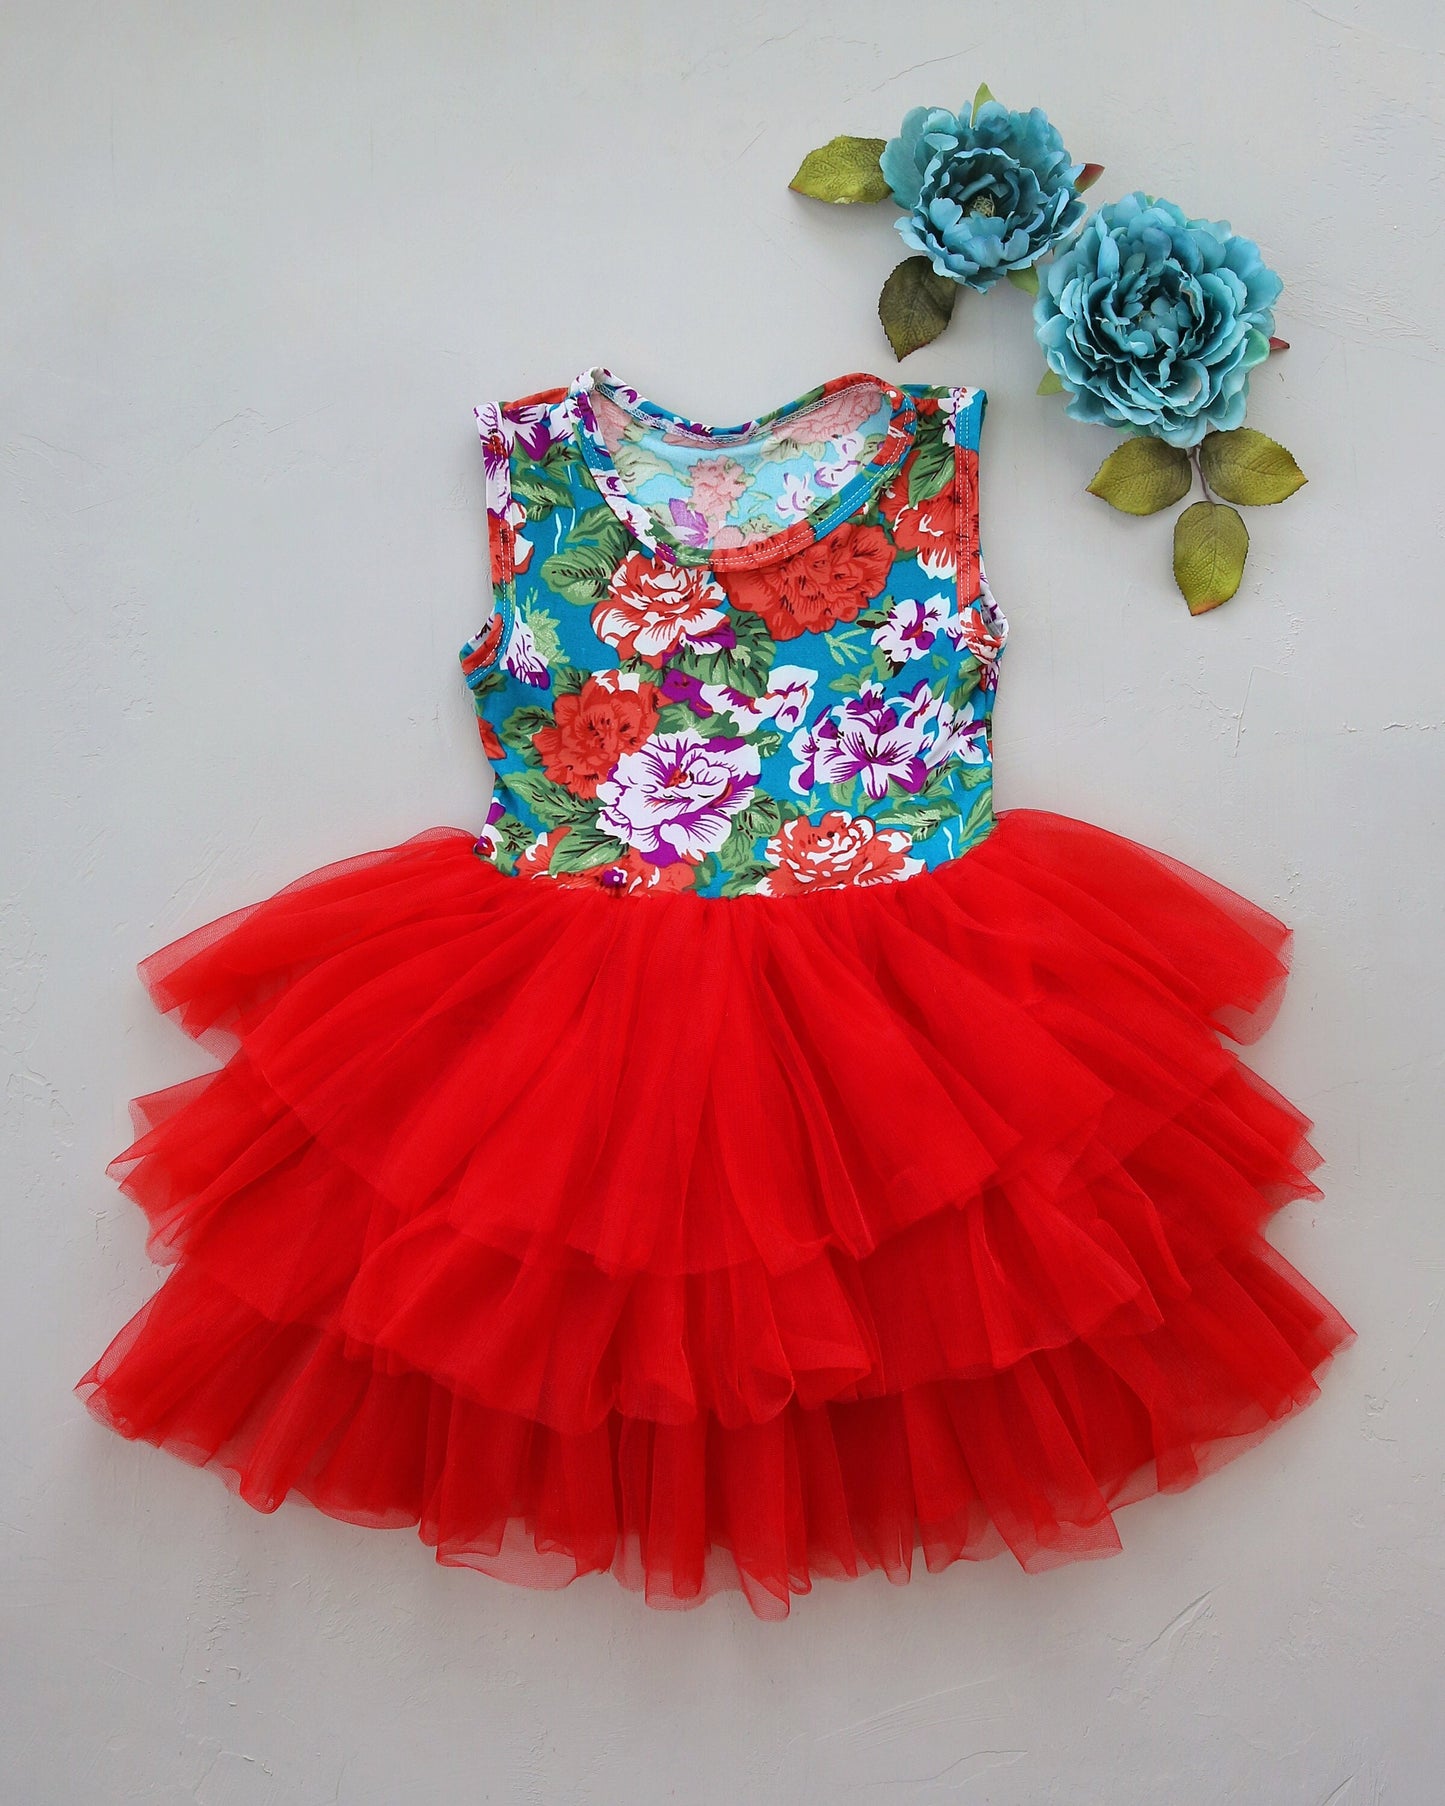 Tutu Dress in Red and Green Floral